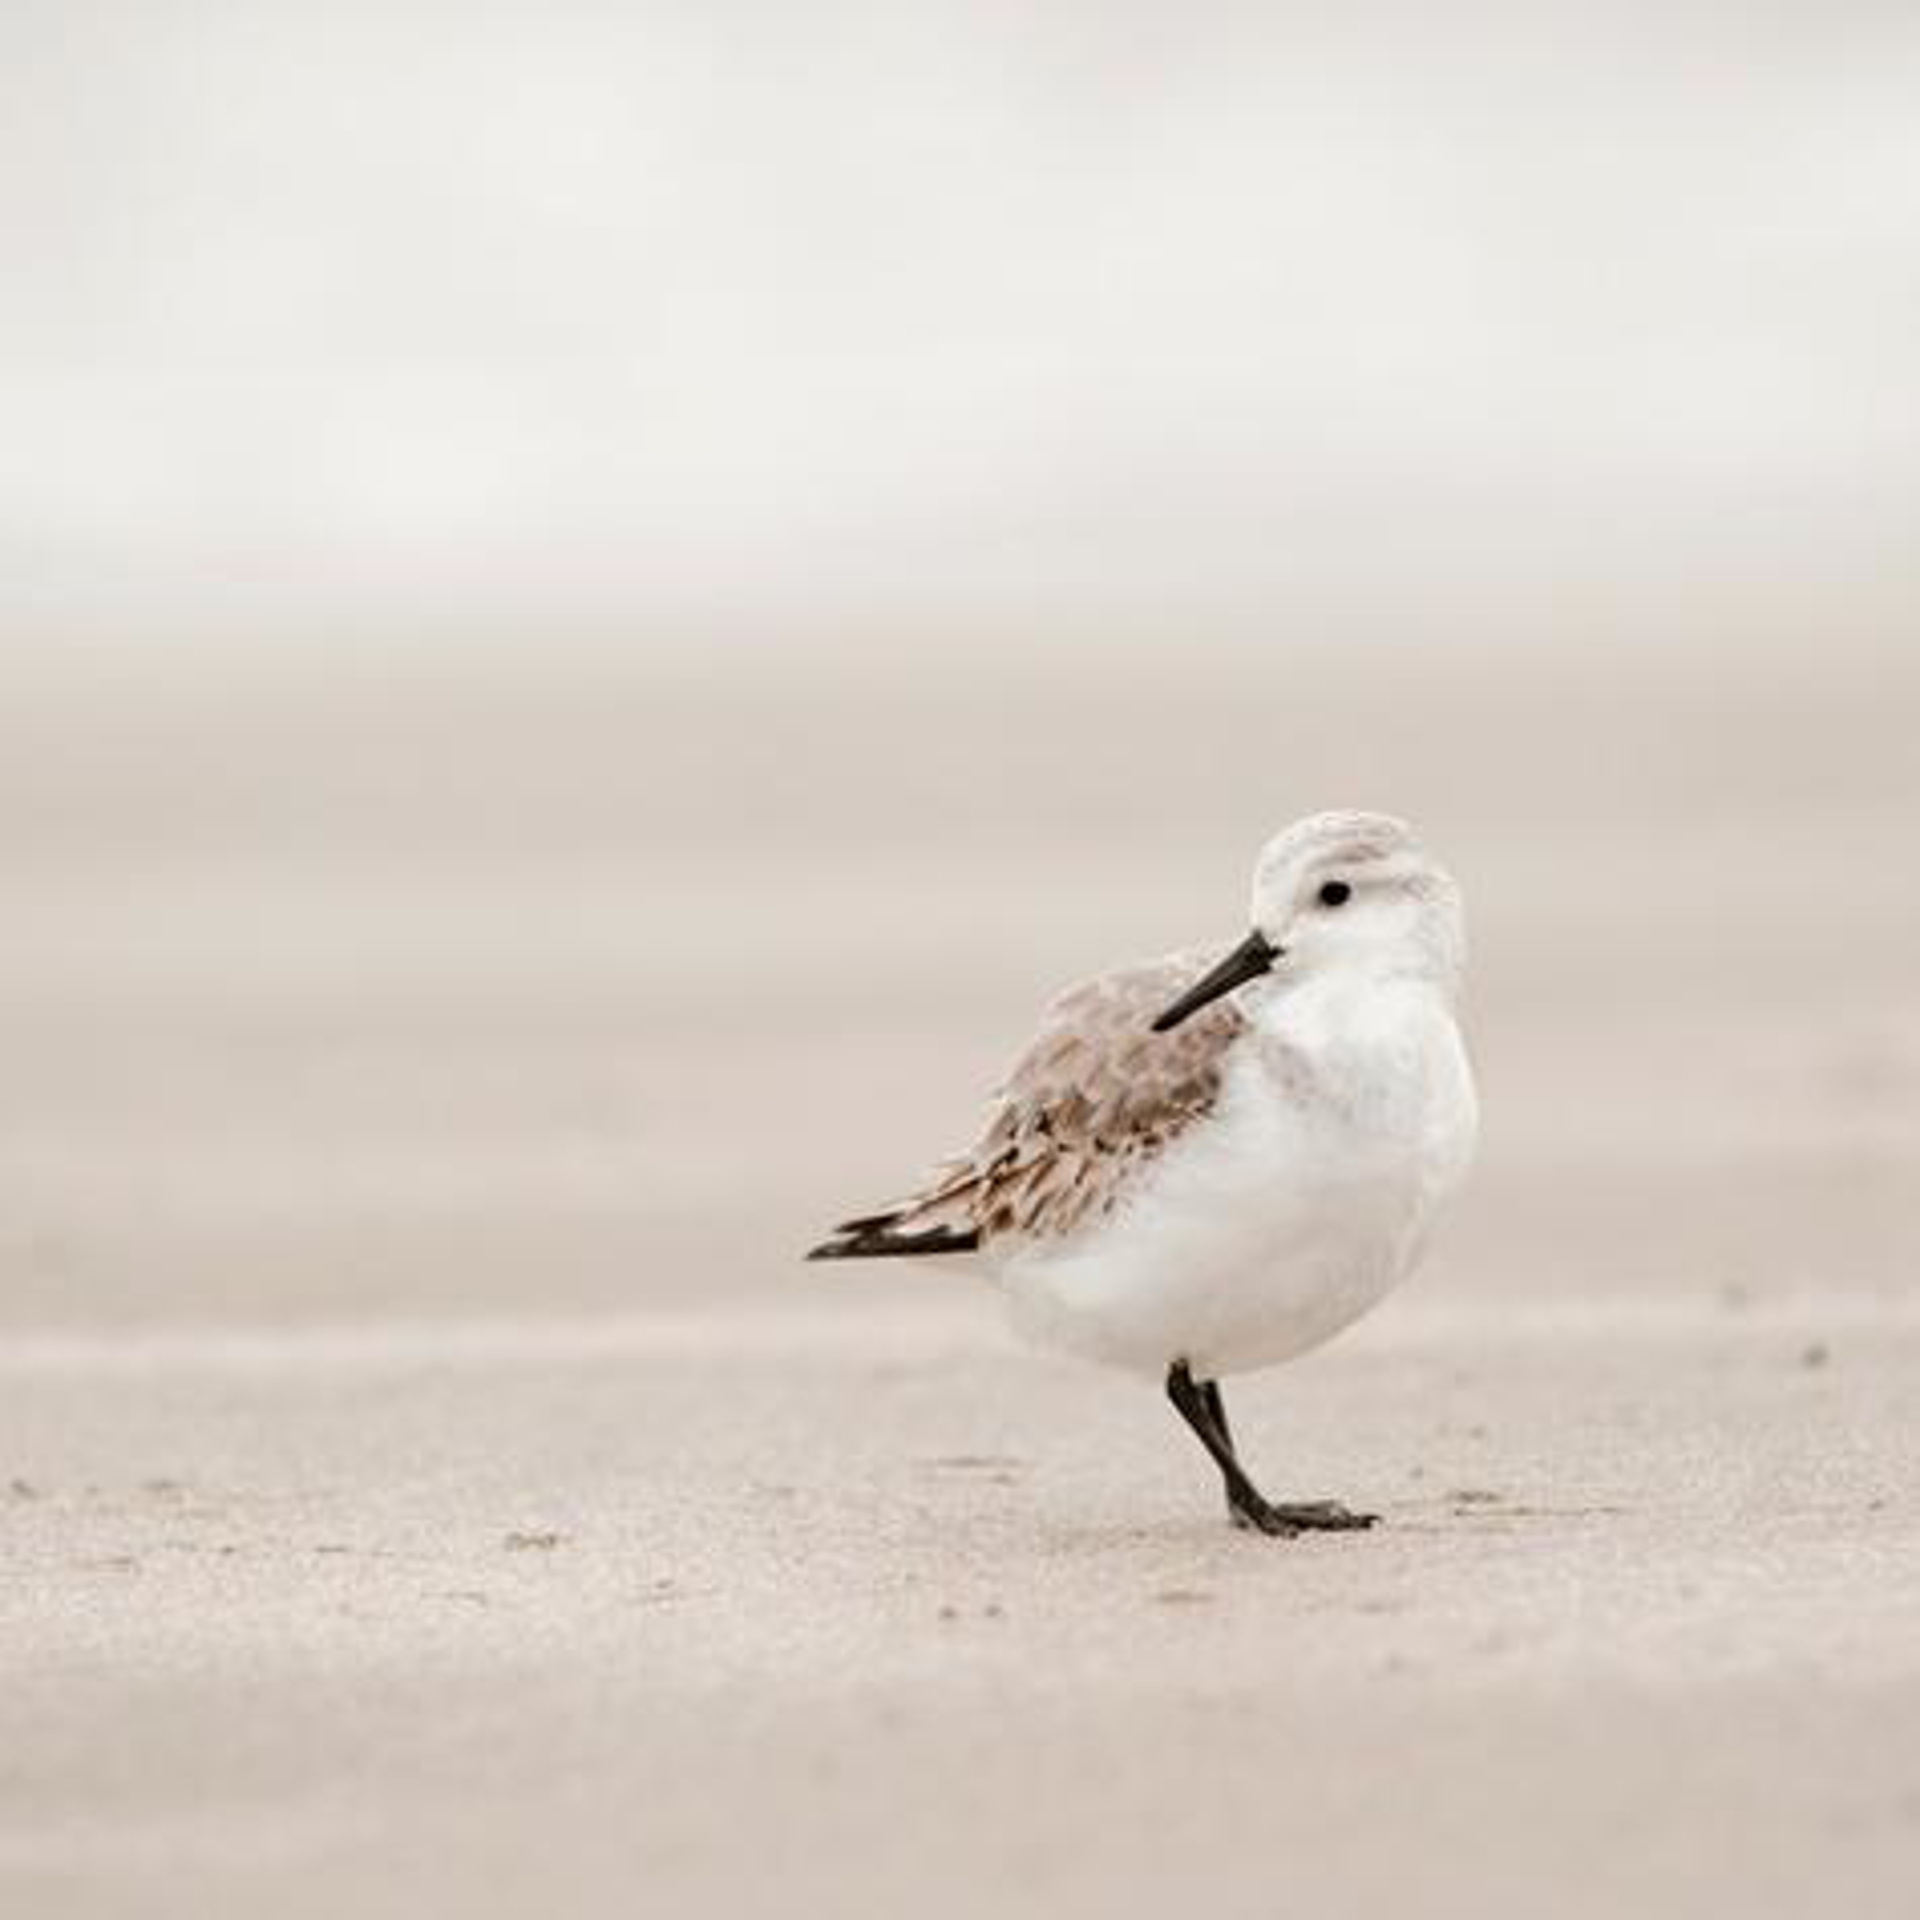 Sandpiper IV by Penny Hoey